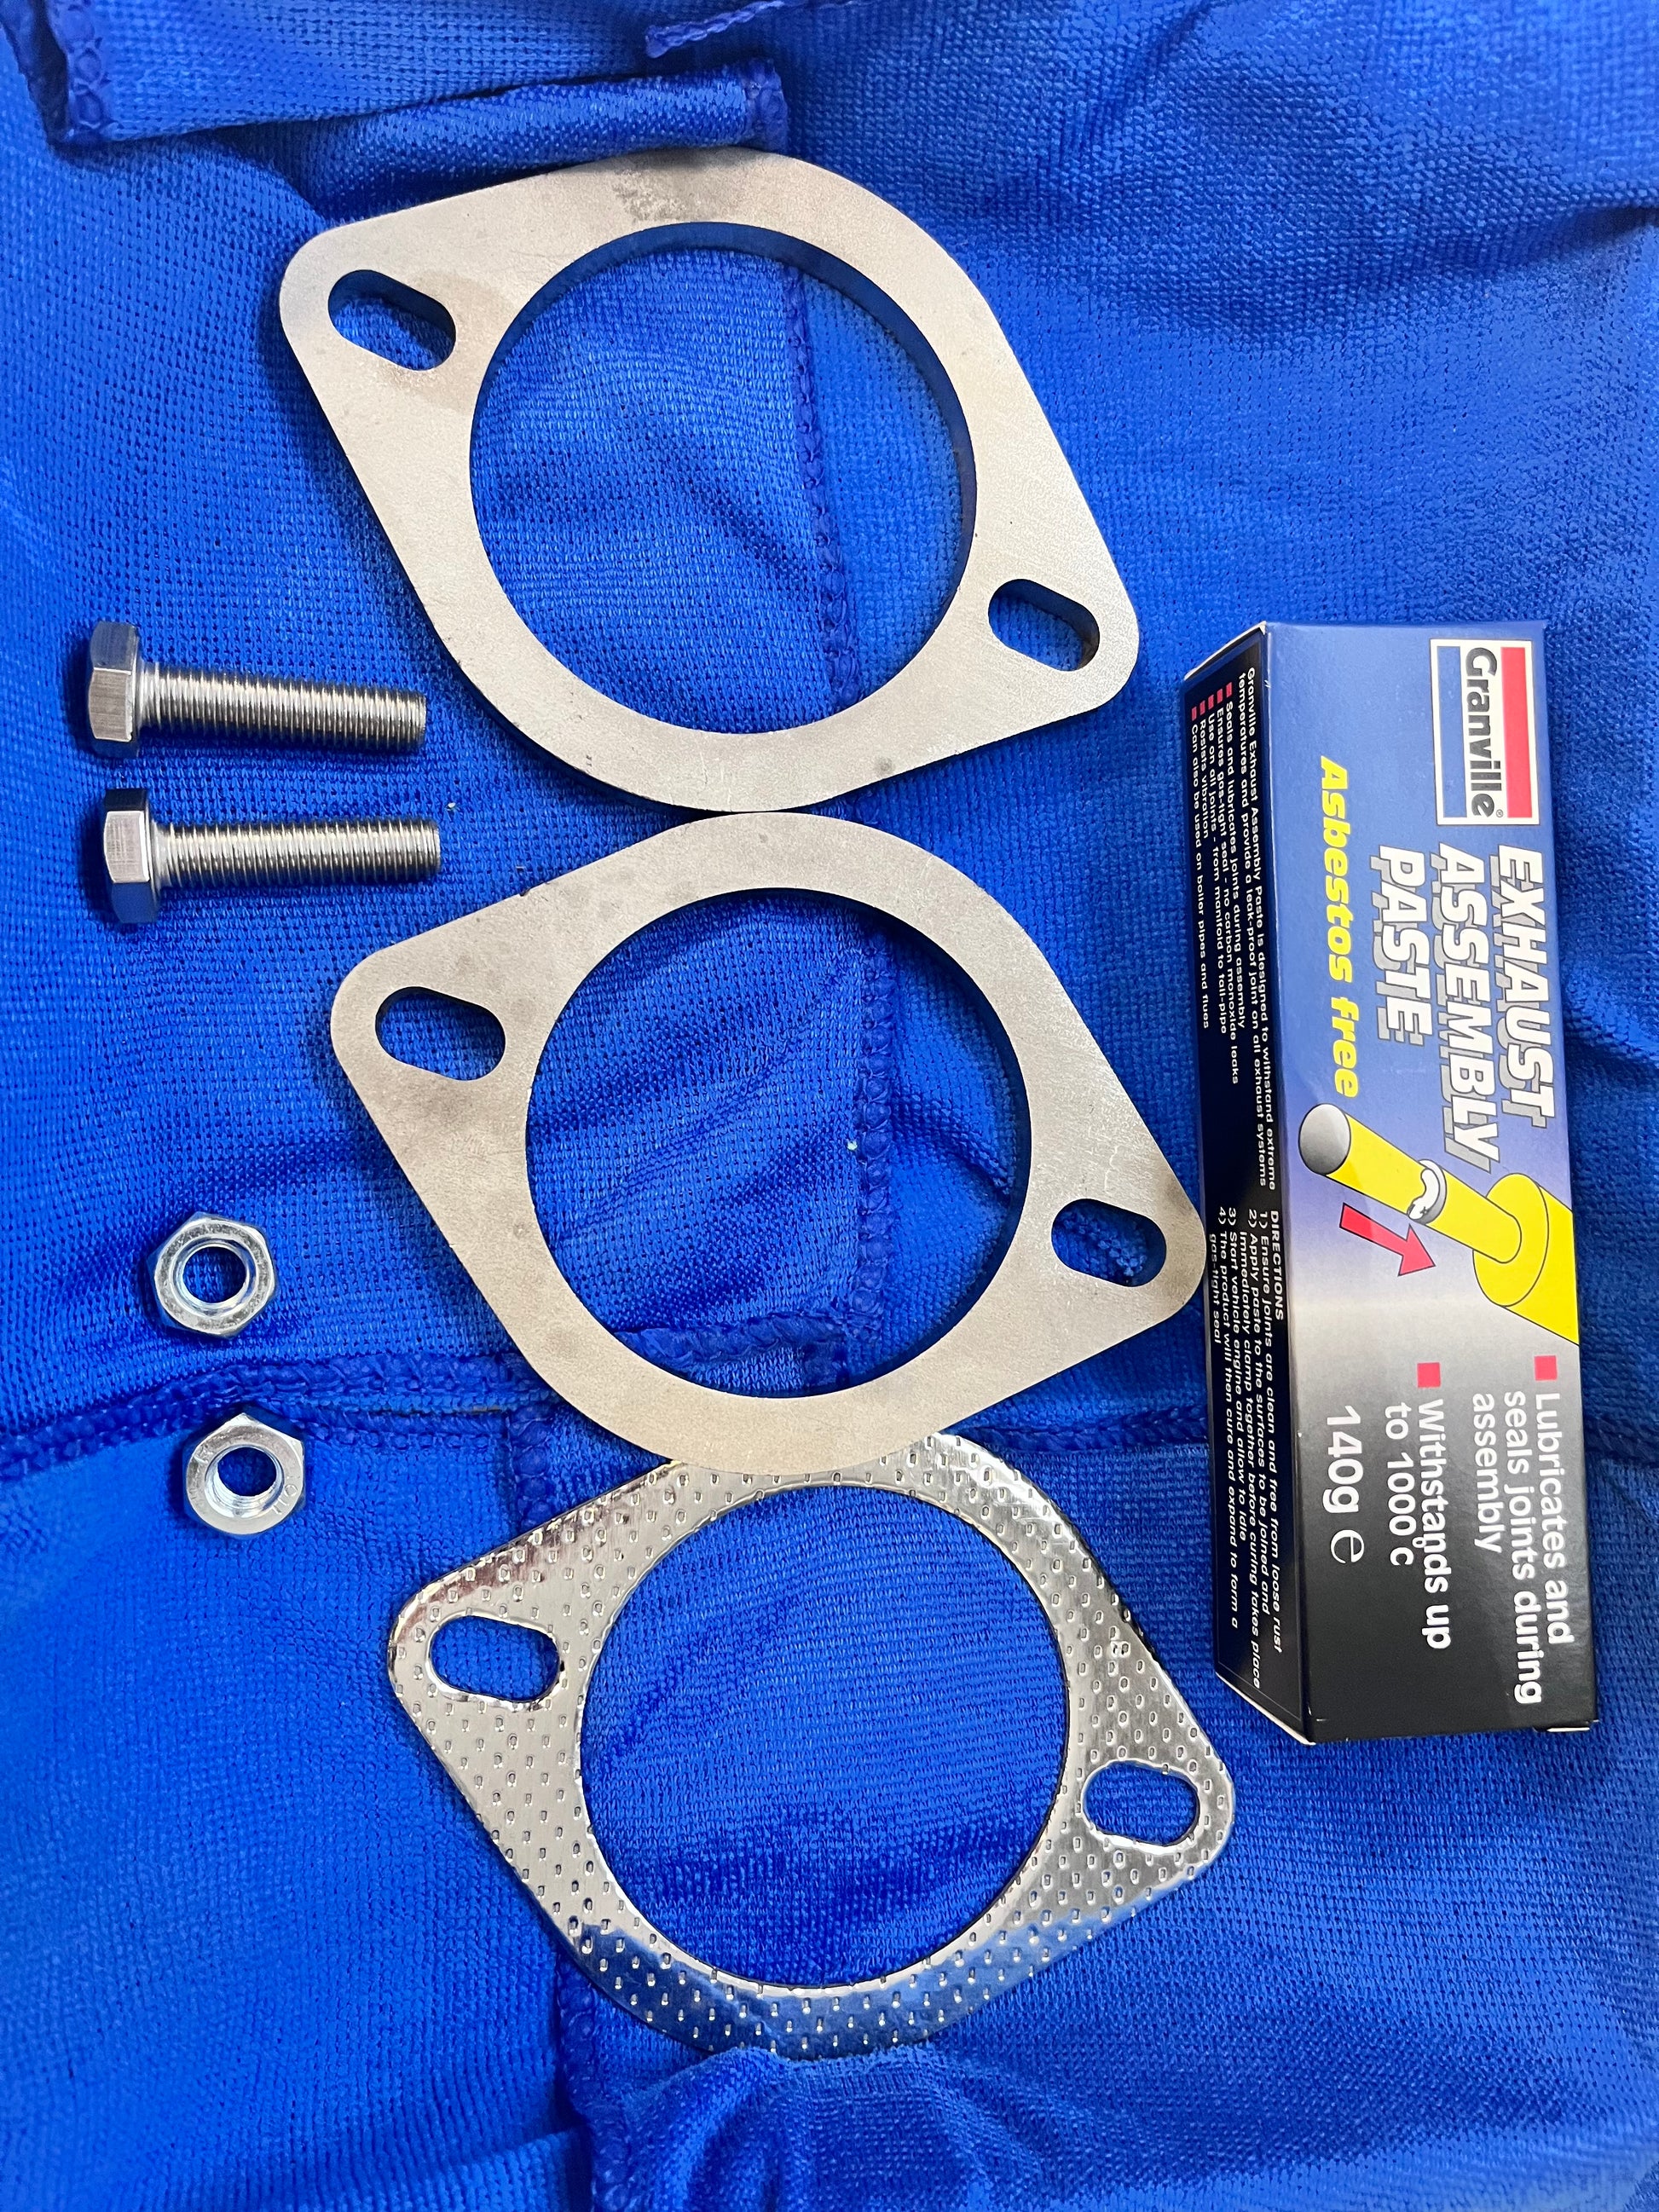 Stainless Steel 3" Exhaust Flange and Gasket Kit with Exhaust Sealant Paste - Pipe Dynamics